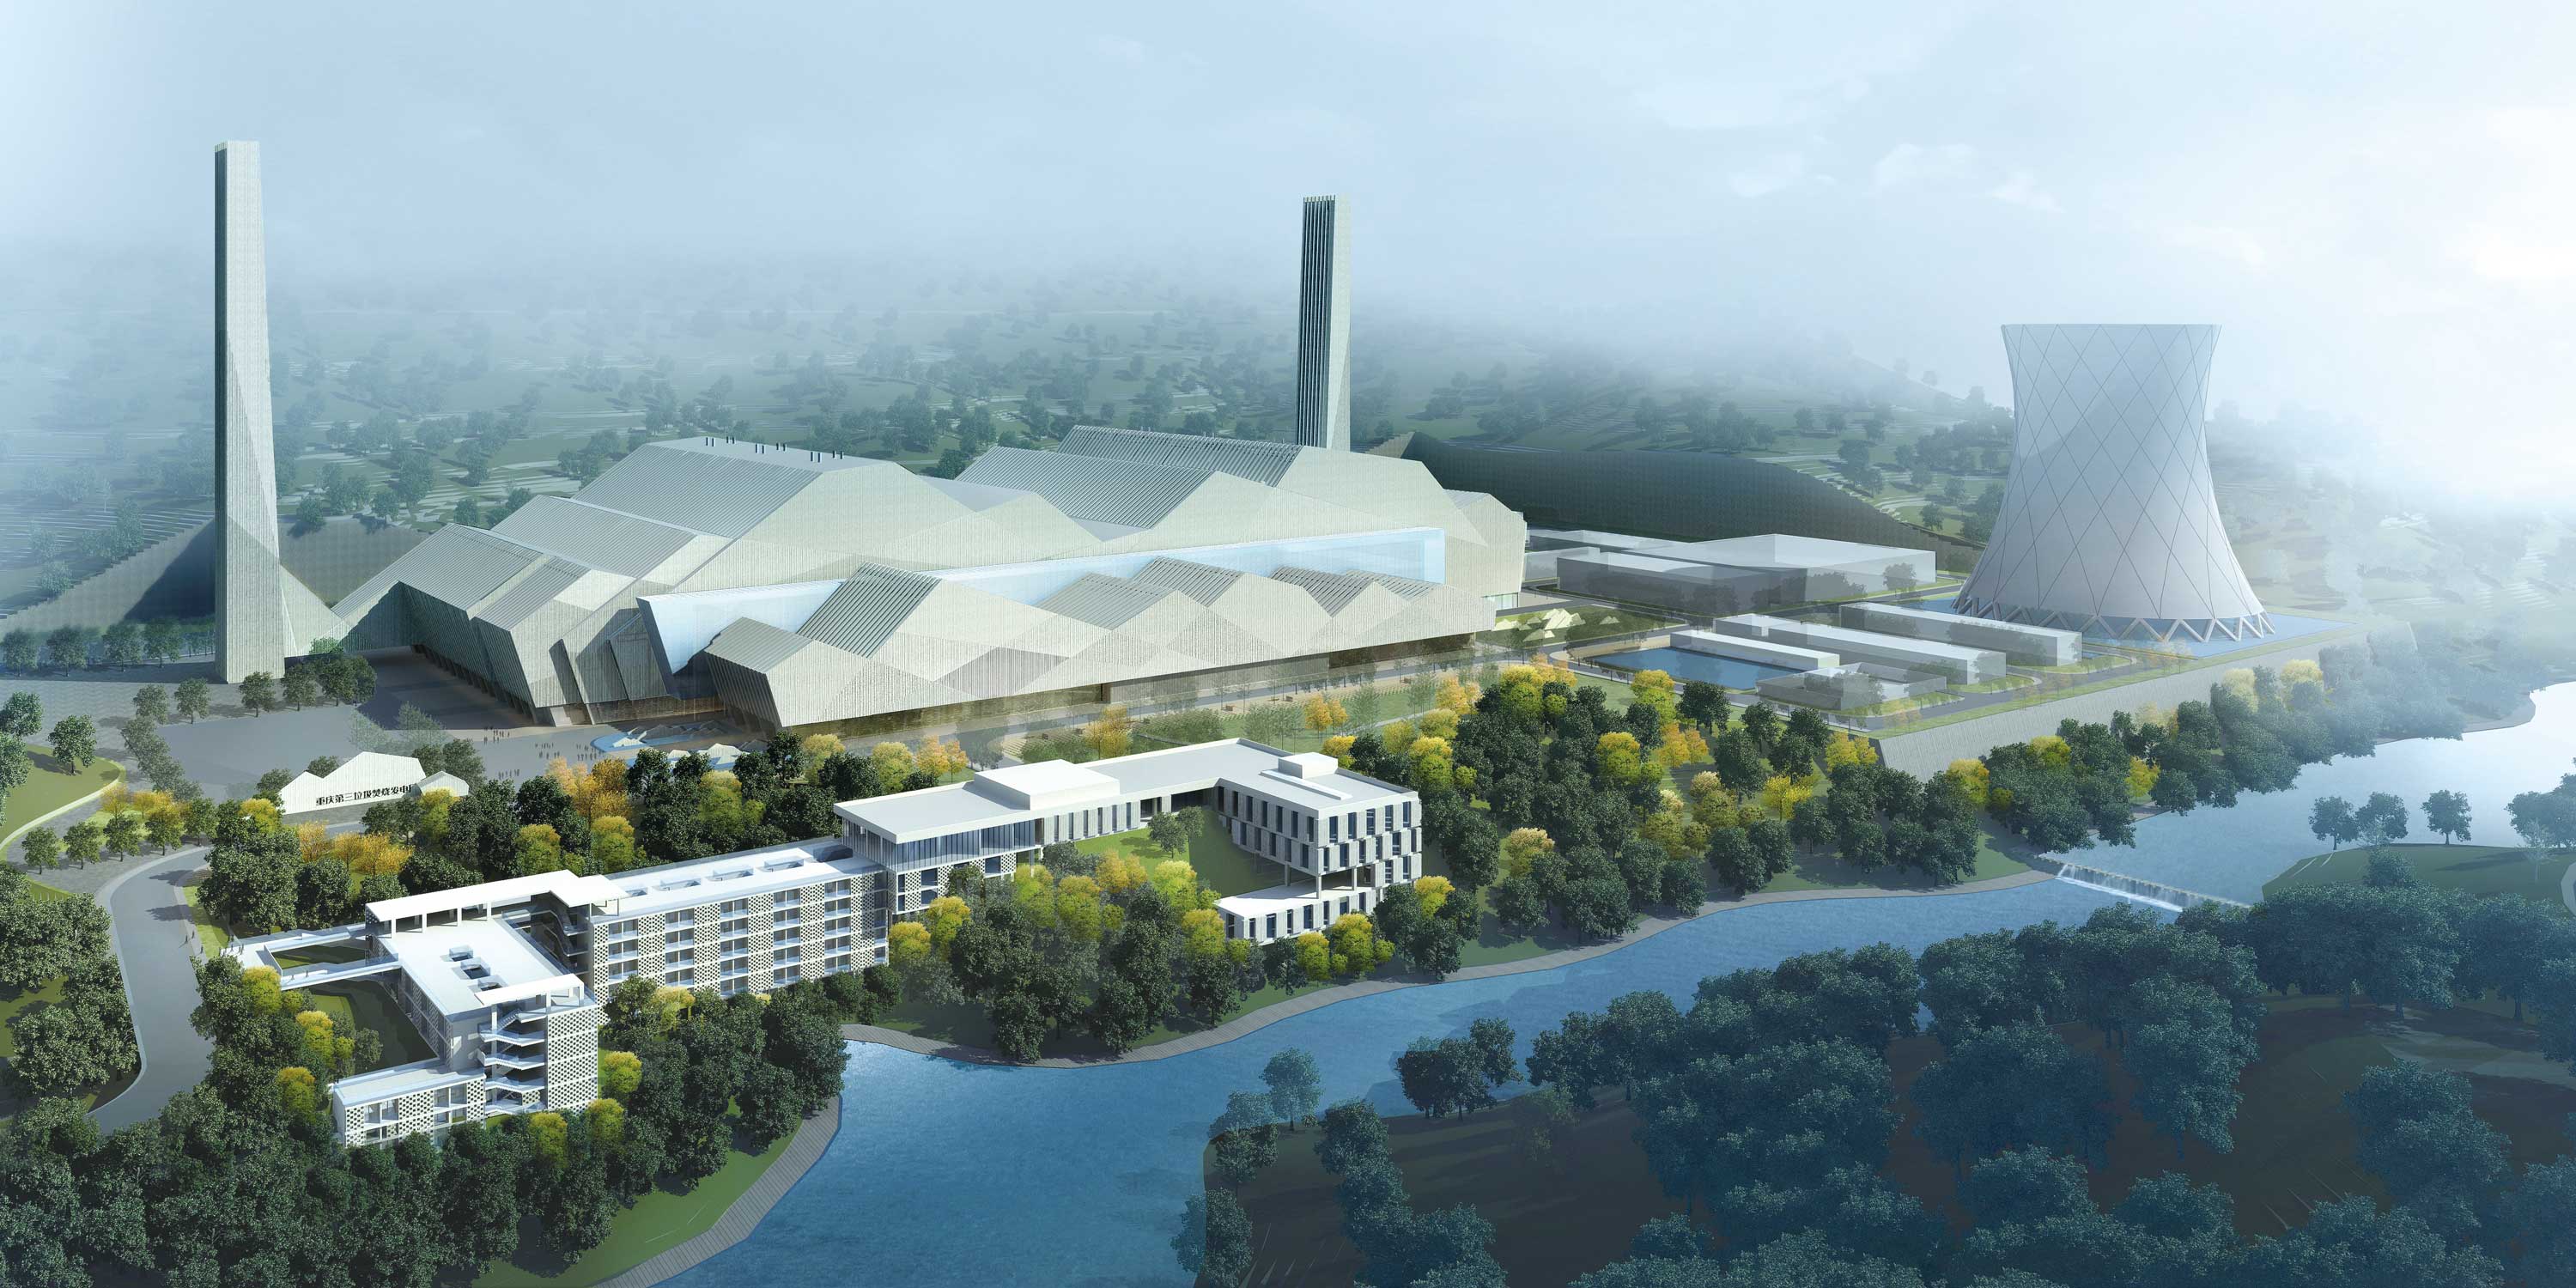 The Third Waste Incineration Power Plant in Chongqing